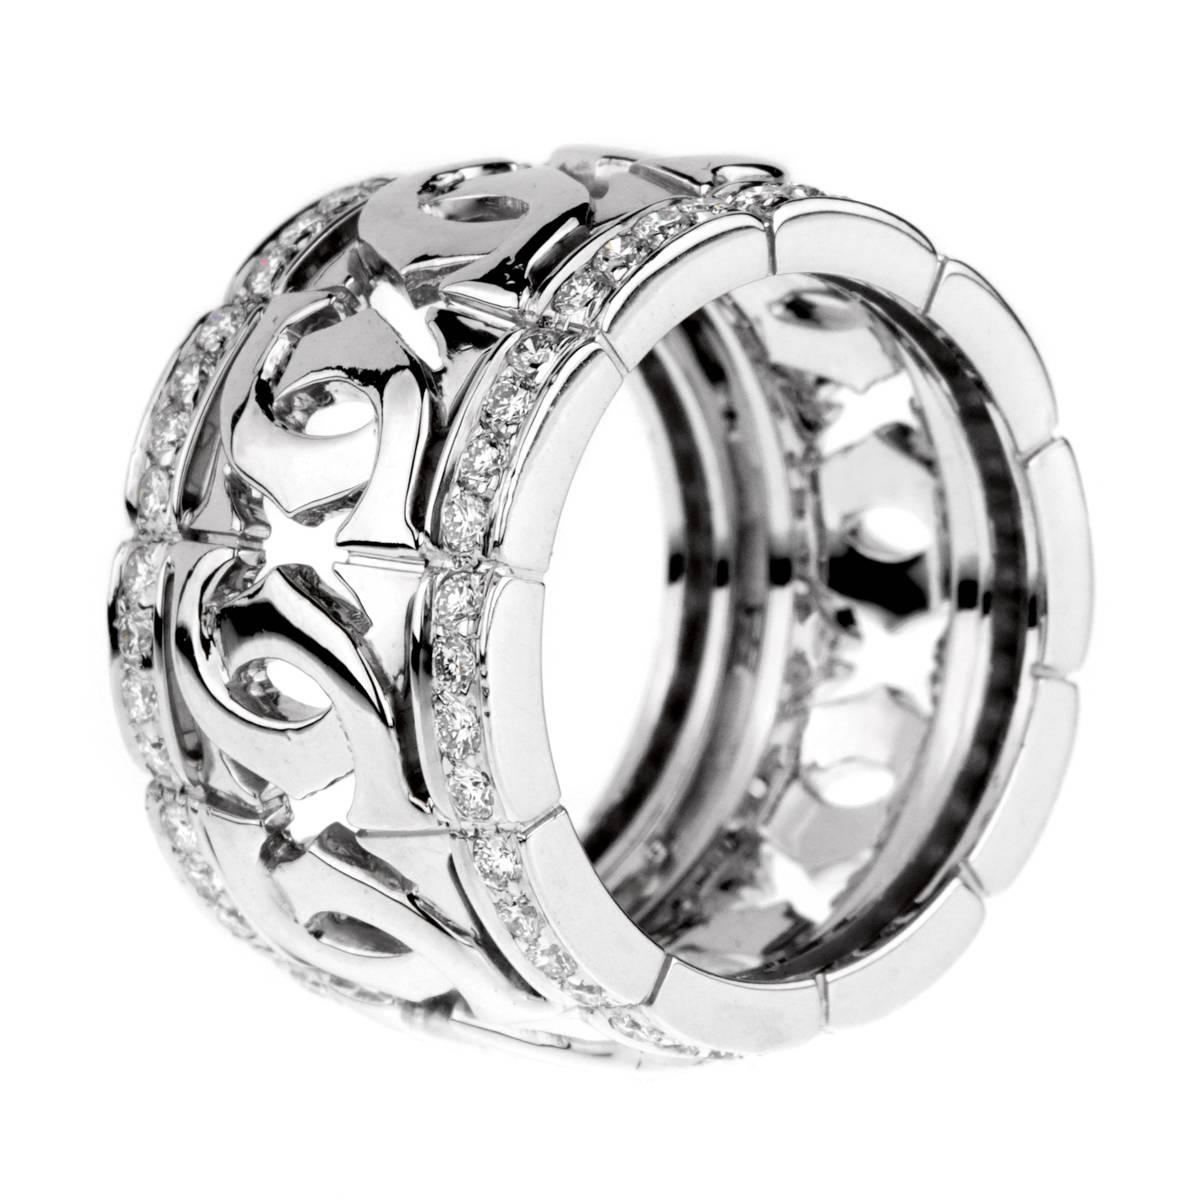 A fabulous iconic Cartier ring featuring the double c motif enhanced by 80 of the finest Cartier round brilliant cut diamonds in 18k white gold. Size 52 / US 6